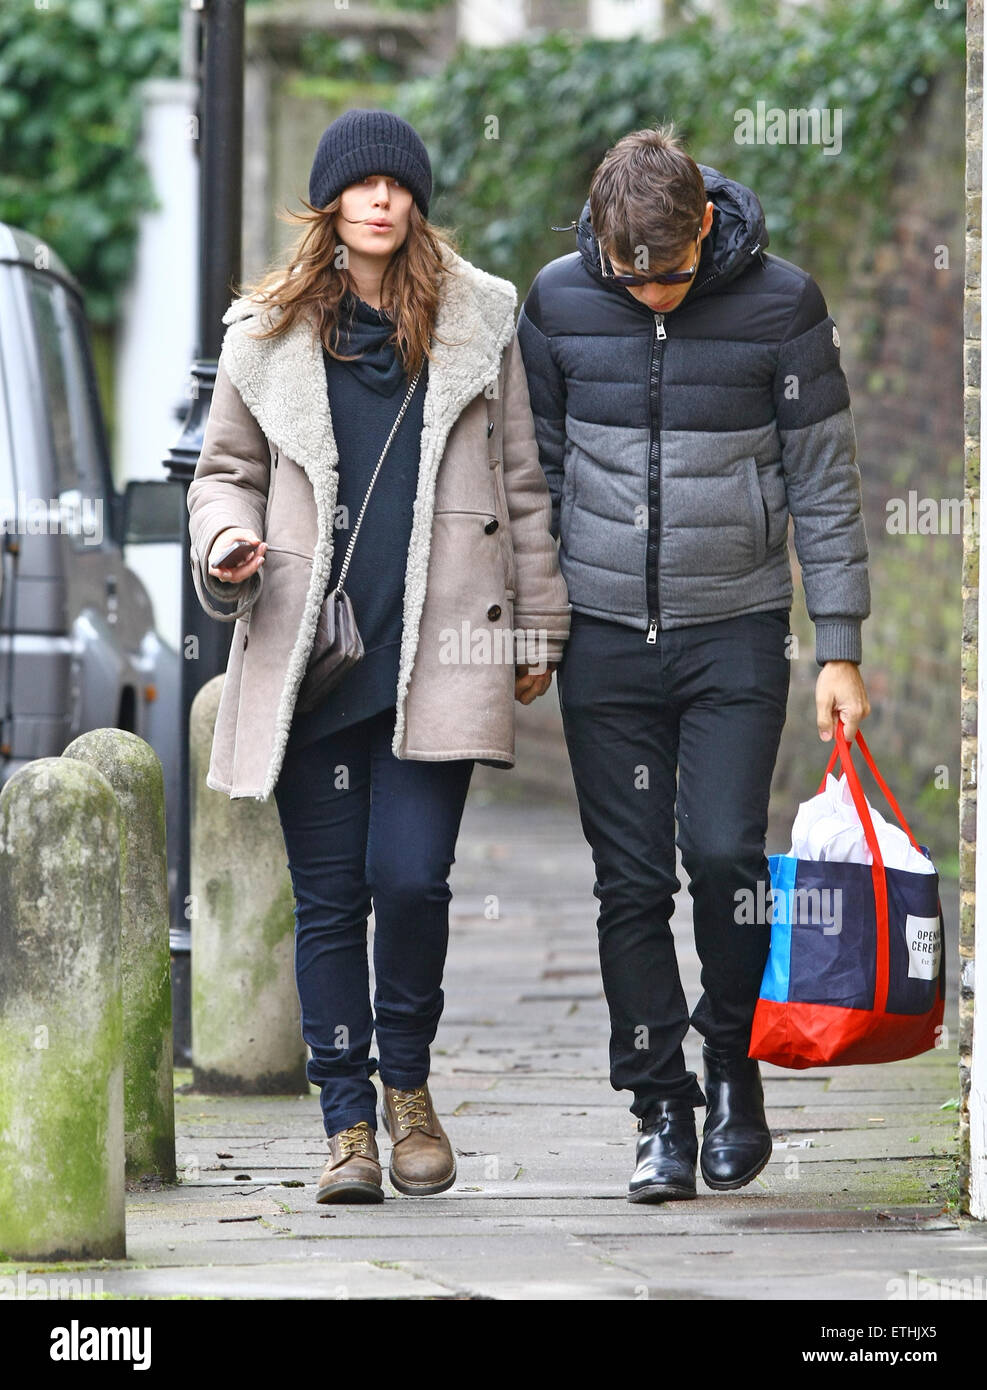 Pregnant Keira Knightley and her husband James Righton take a trip to a dry  cleaners in London Featuring: Keira Knightley, James Righton Where: London,  United Kingdom When: 25 Feb 2015 Credit: WENN.com